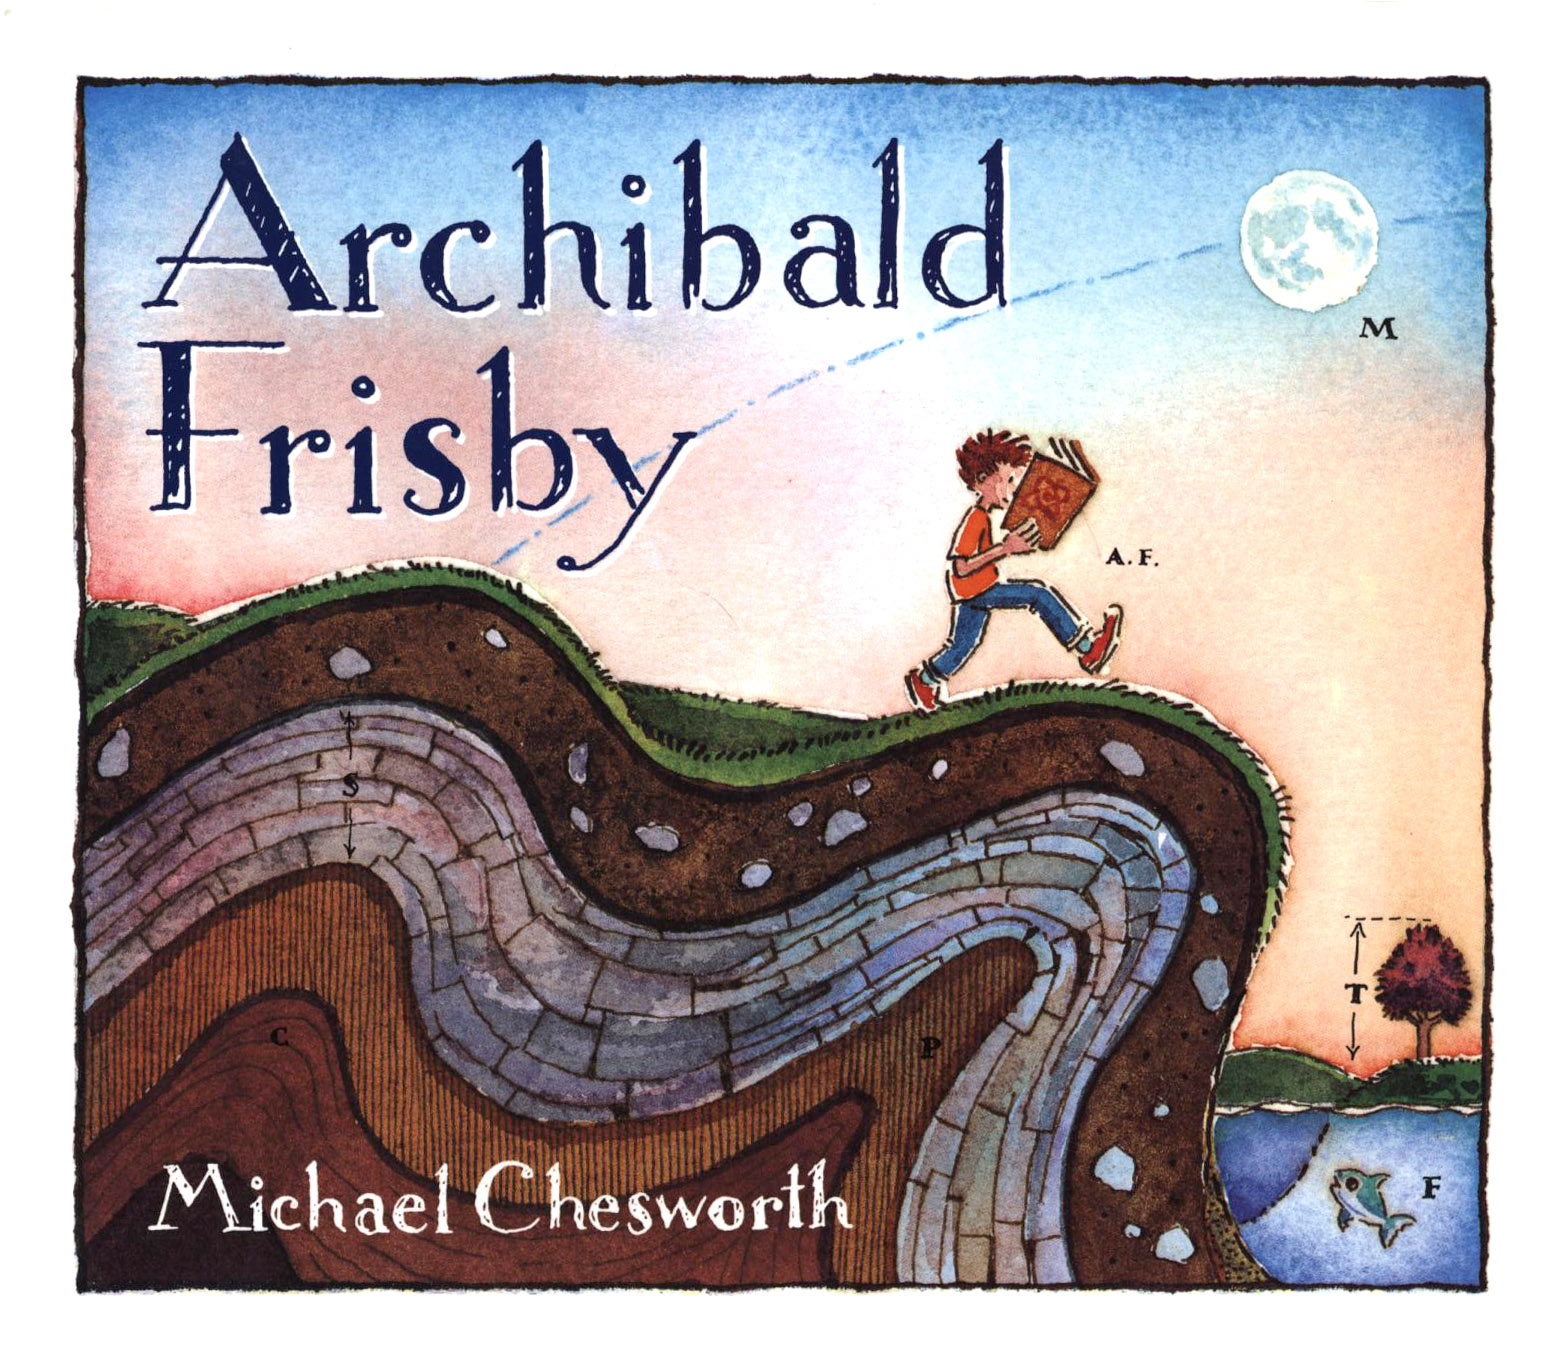 Archibald Frisby by Michael Chesworth